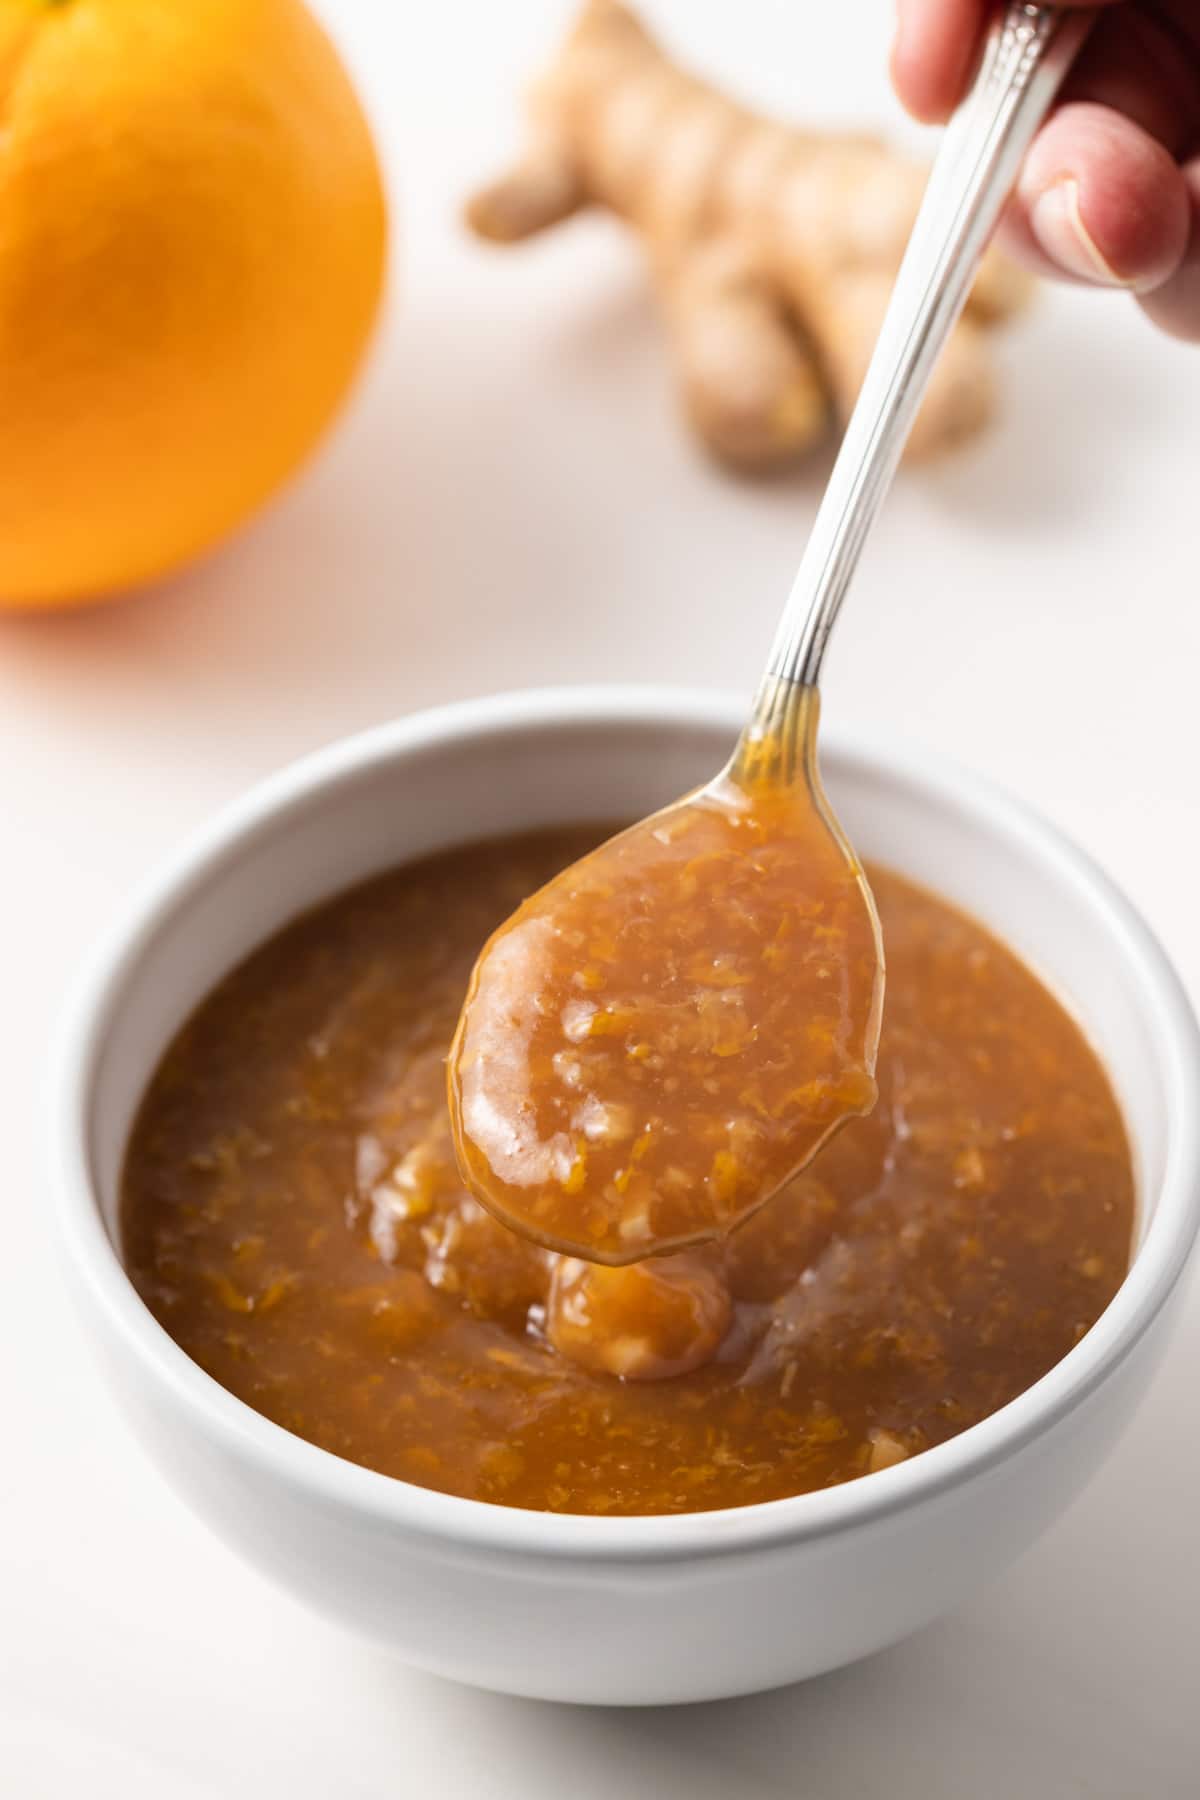 Orange ginger sauce on a spoon.